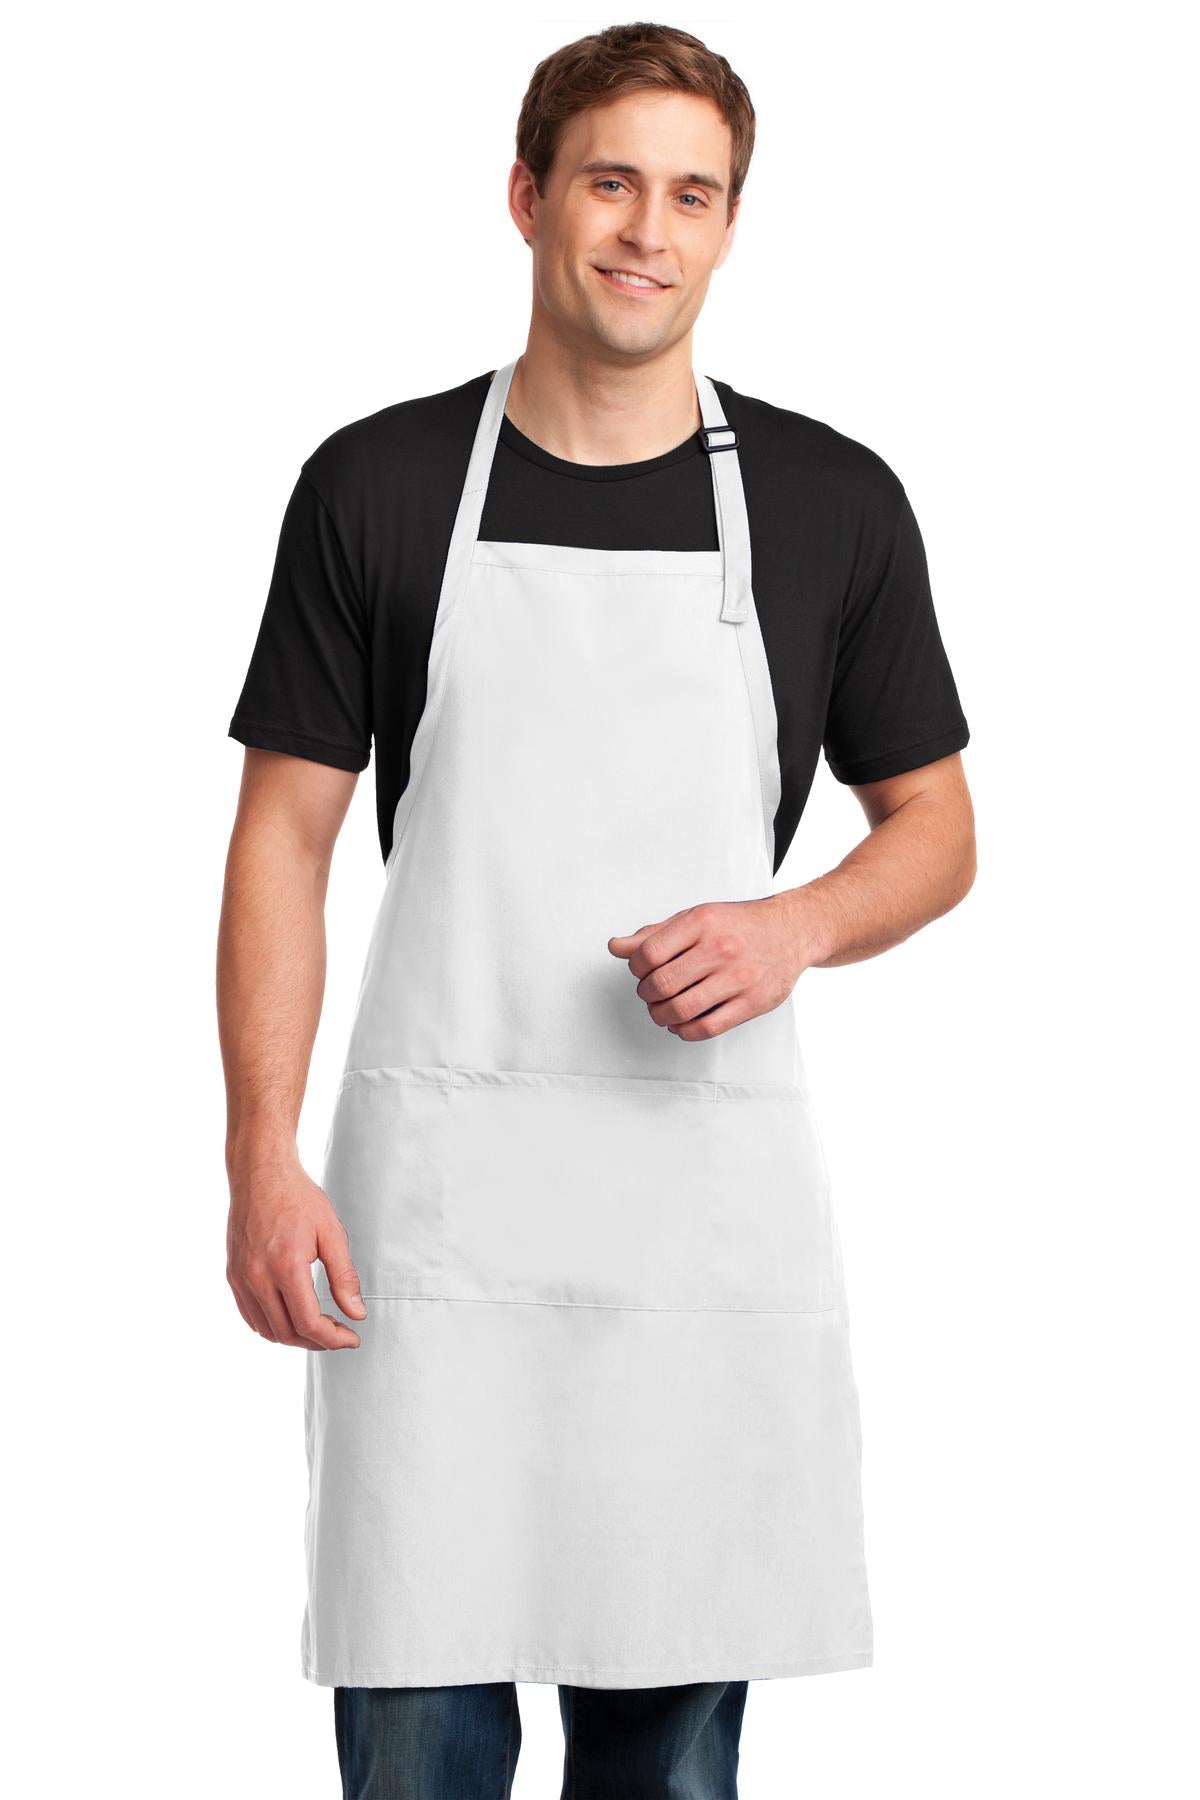 Port Authority® Easy Care Extra Long Bib Apron with Stain Release. A700 - DFW Impression